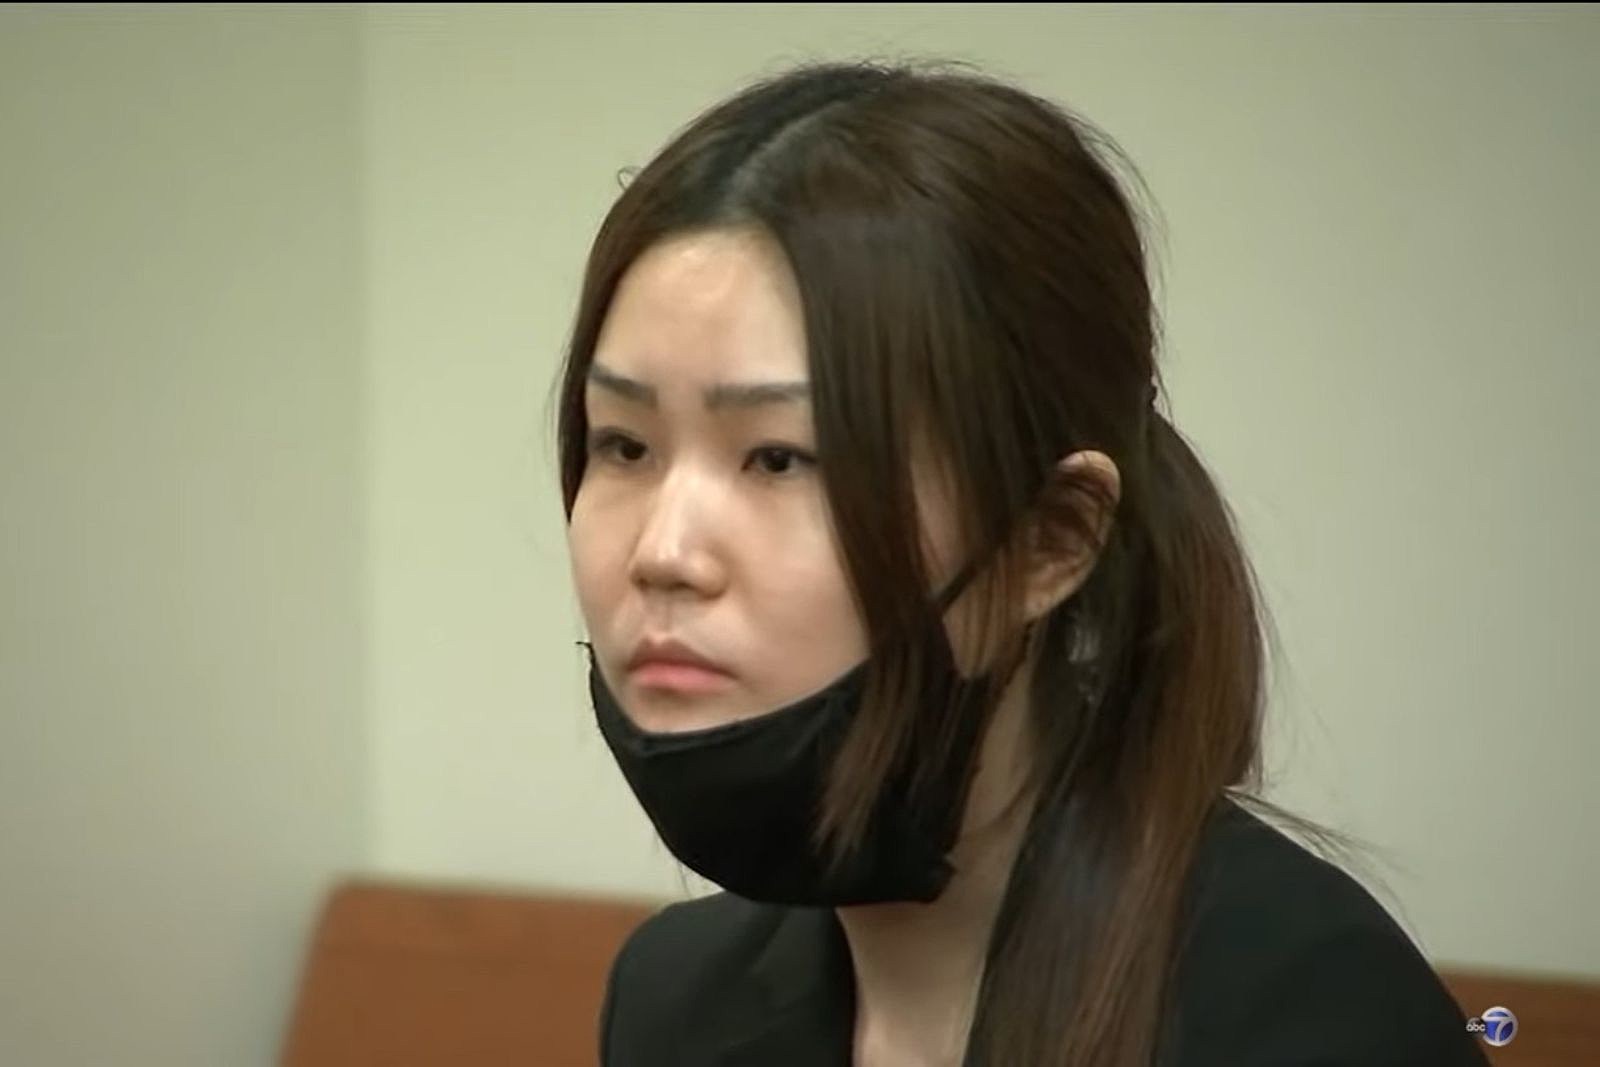 No jail for NJ woman who identified as a high school student